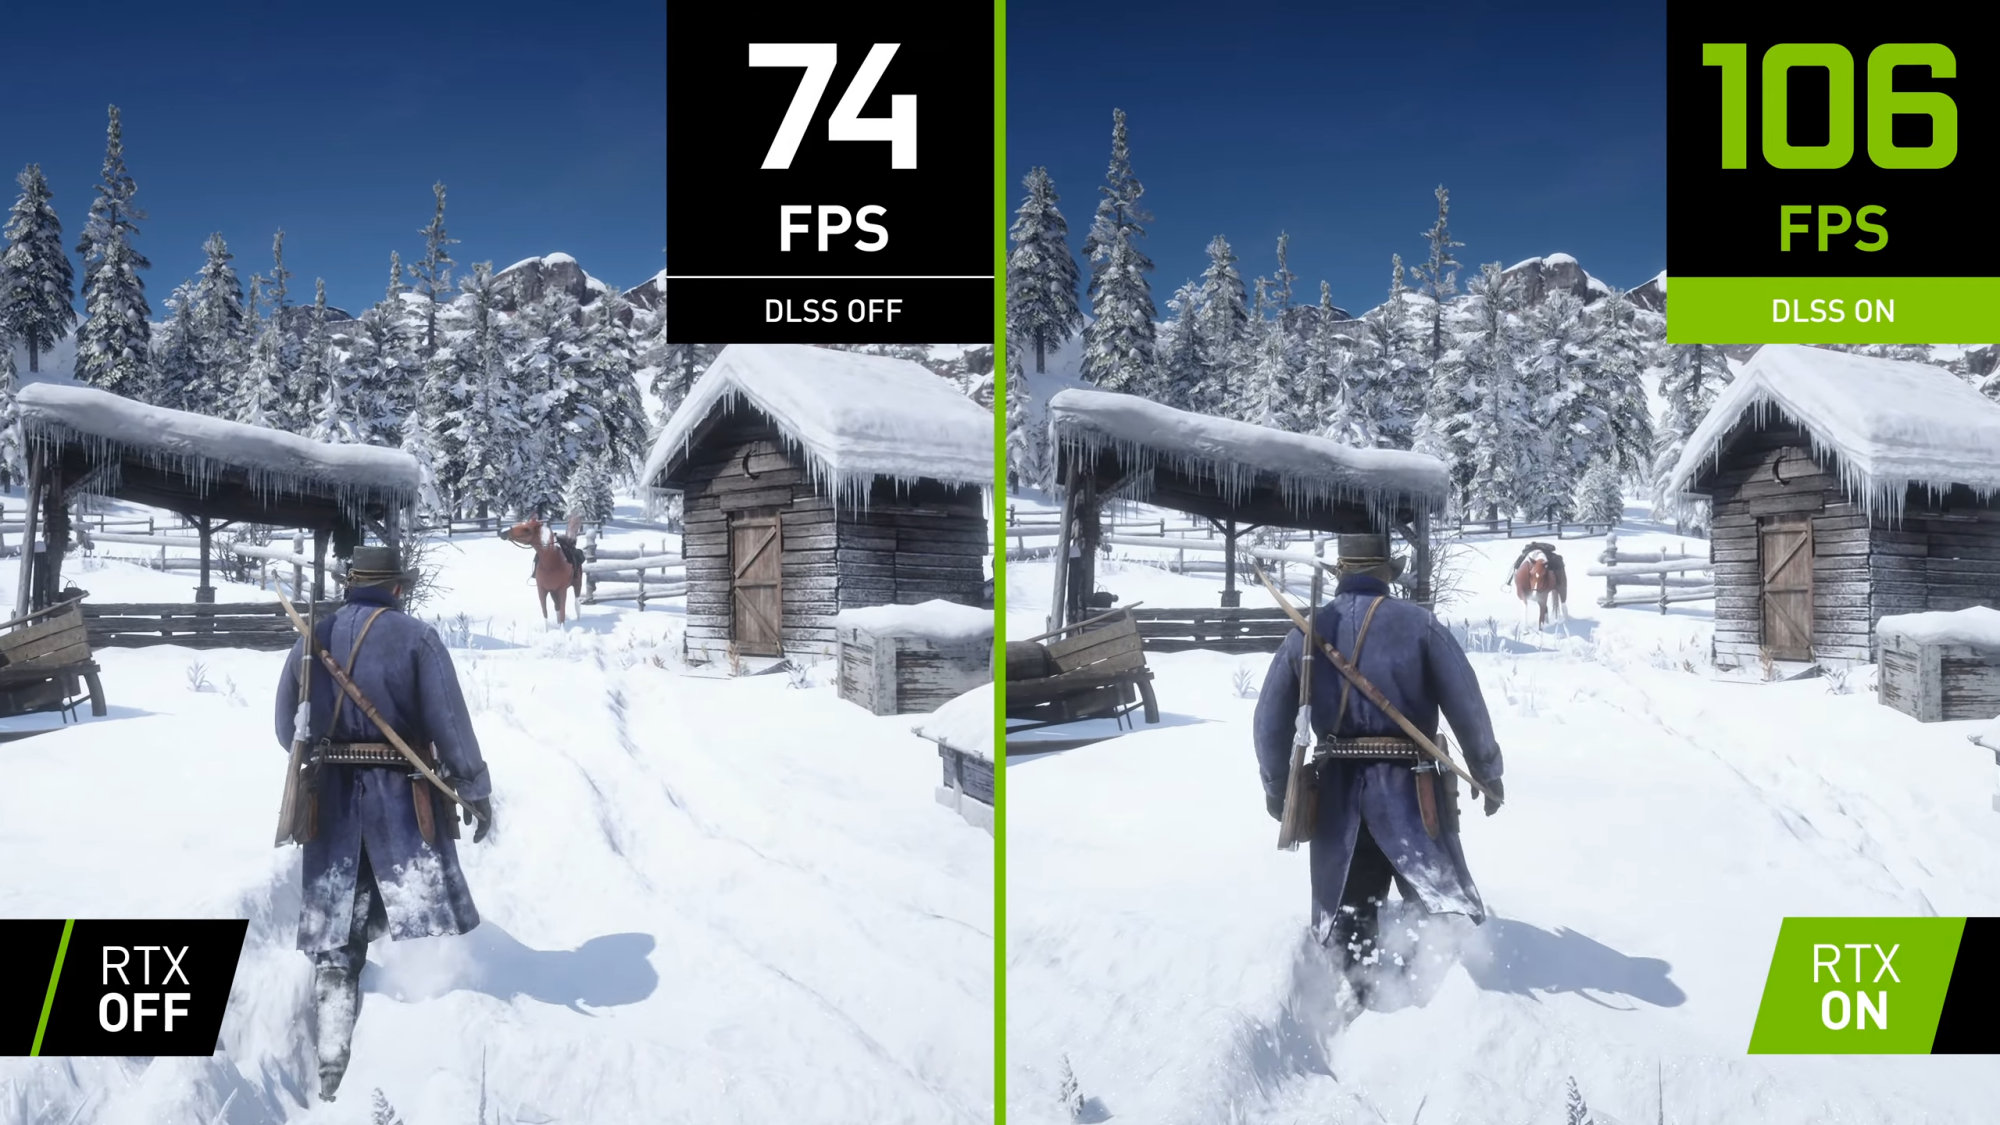 Monograph stereoanlæg fast NVIDIA DLSS is now available in Red Dead Redemption 2 and Red Dead Online,  up to 45% higher performance at 4K - VideoCardz.com